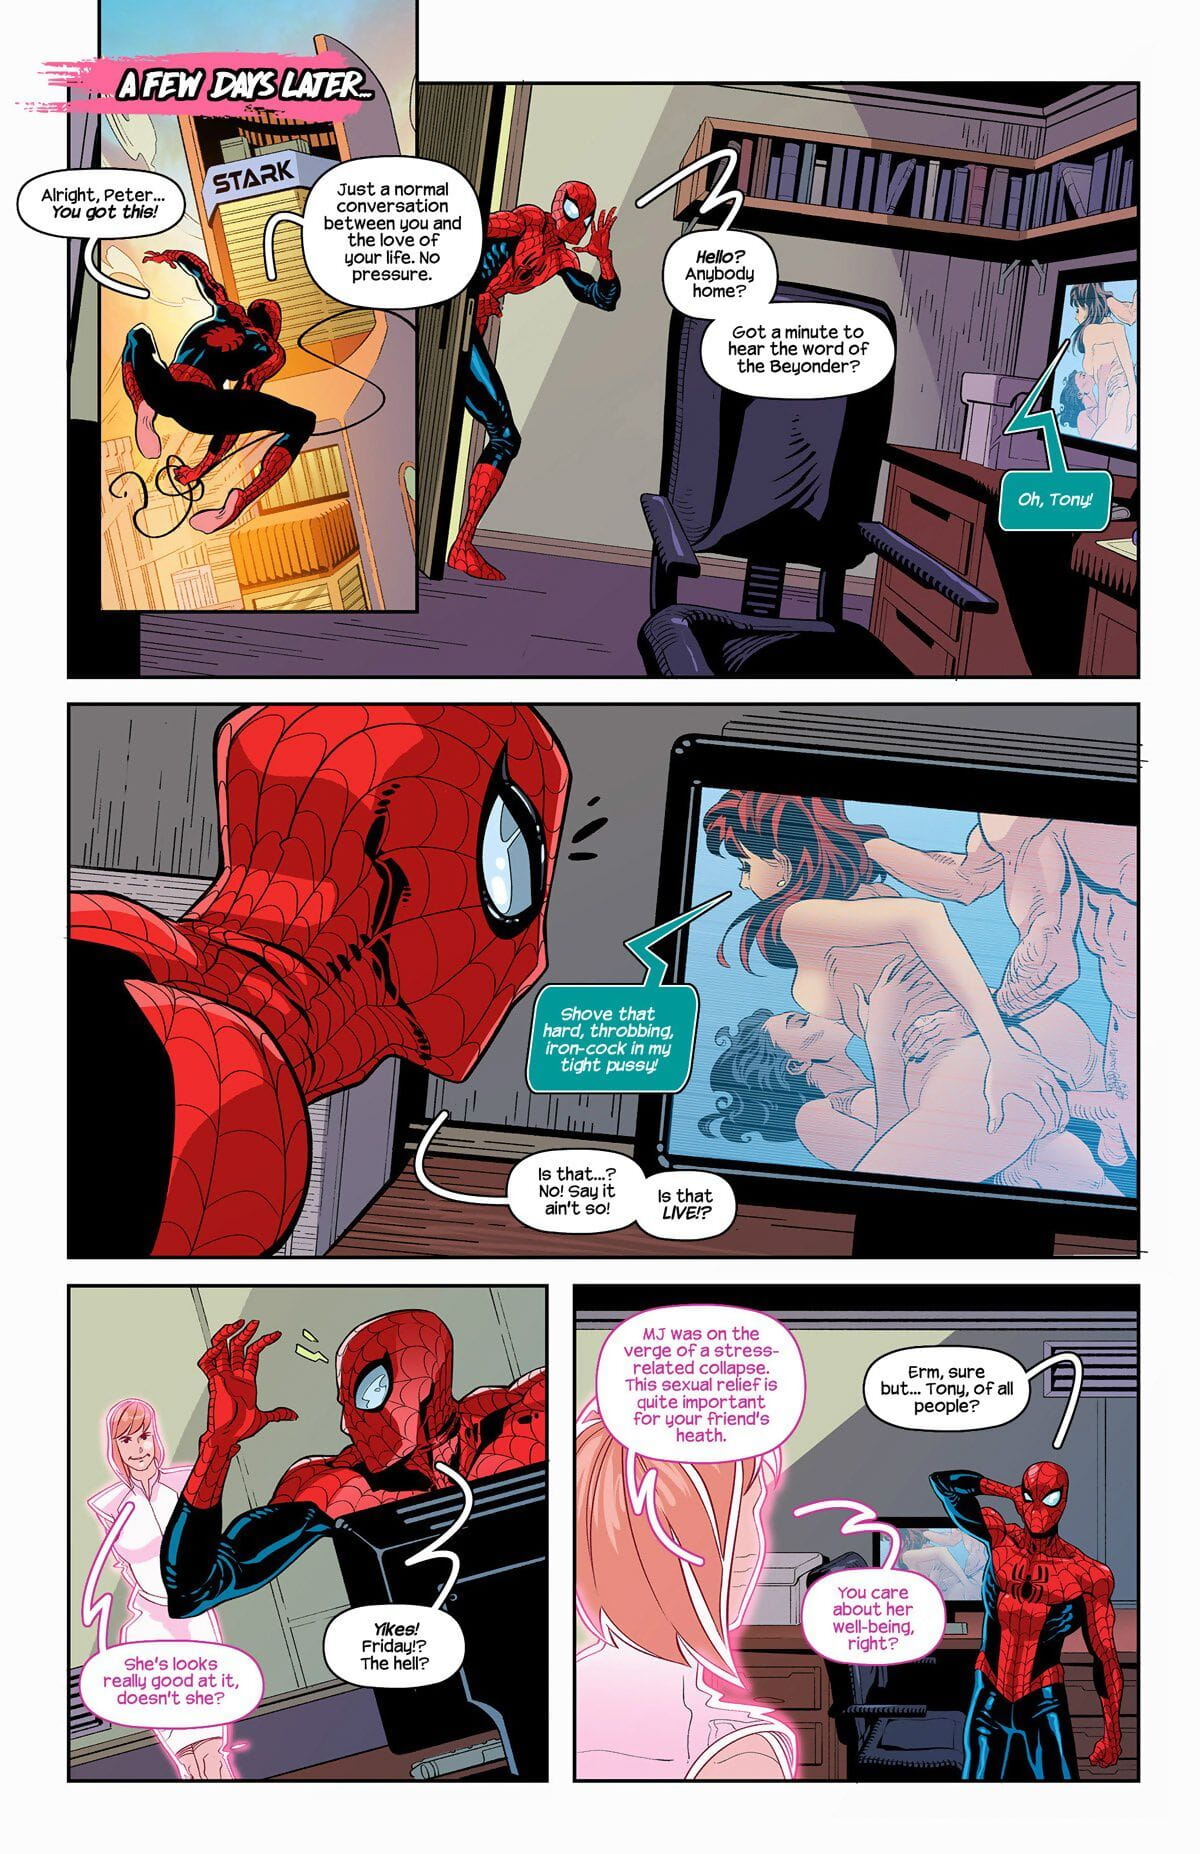 Tracy Scops- Invincible Iron Spider – page 1